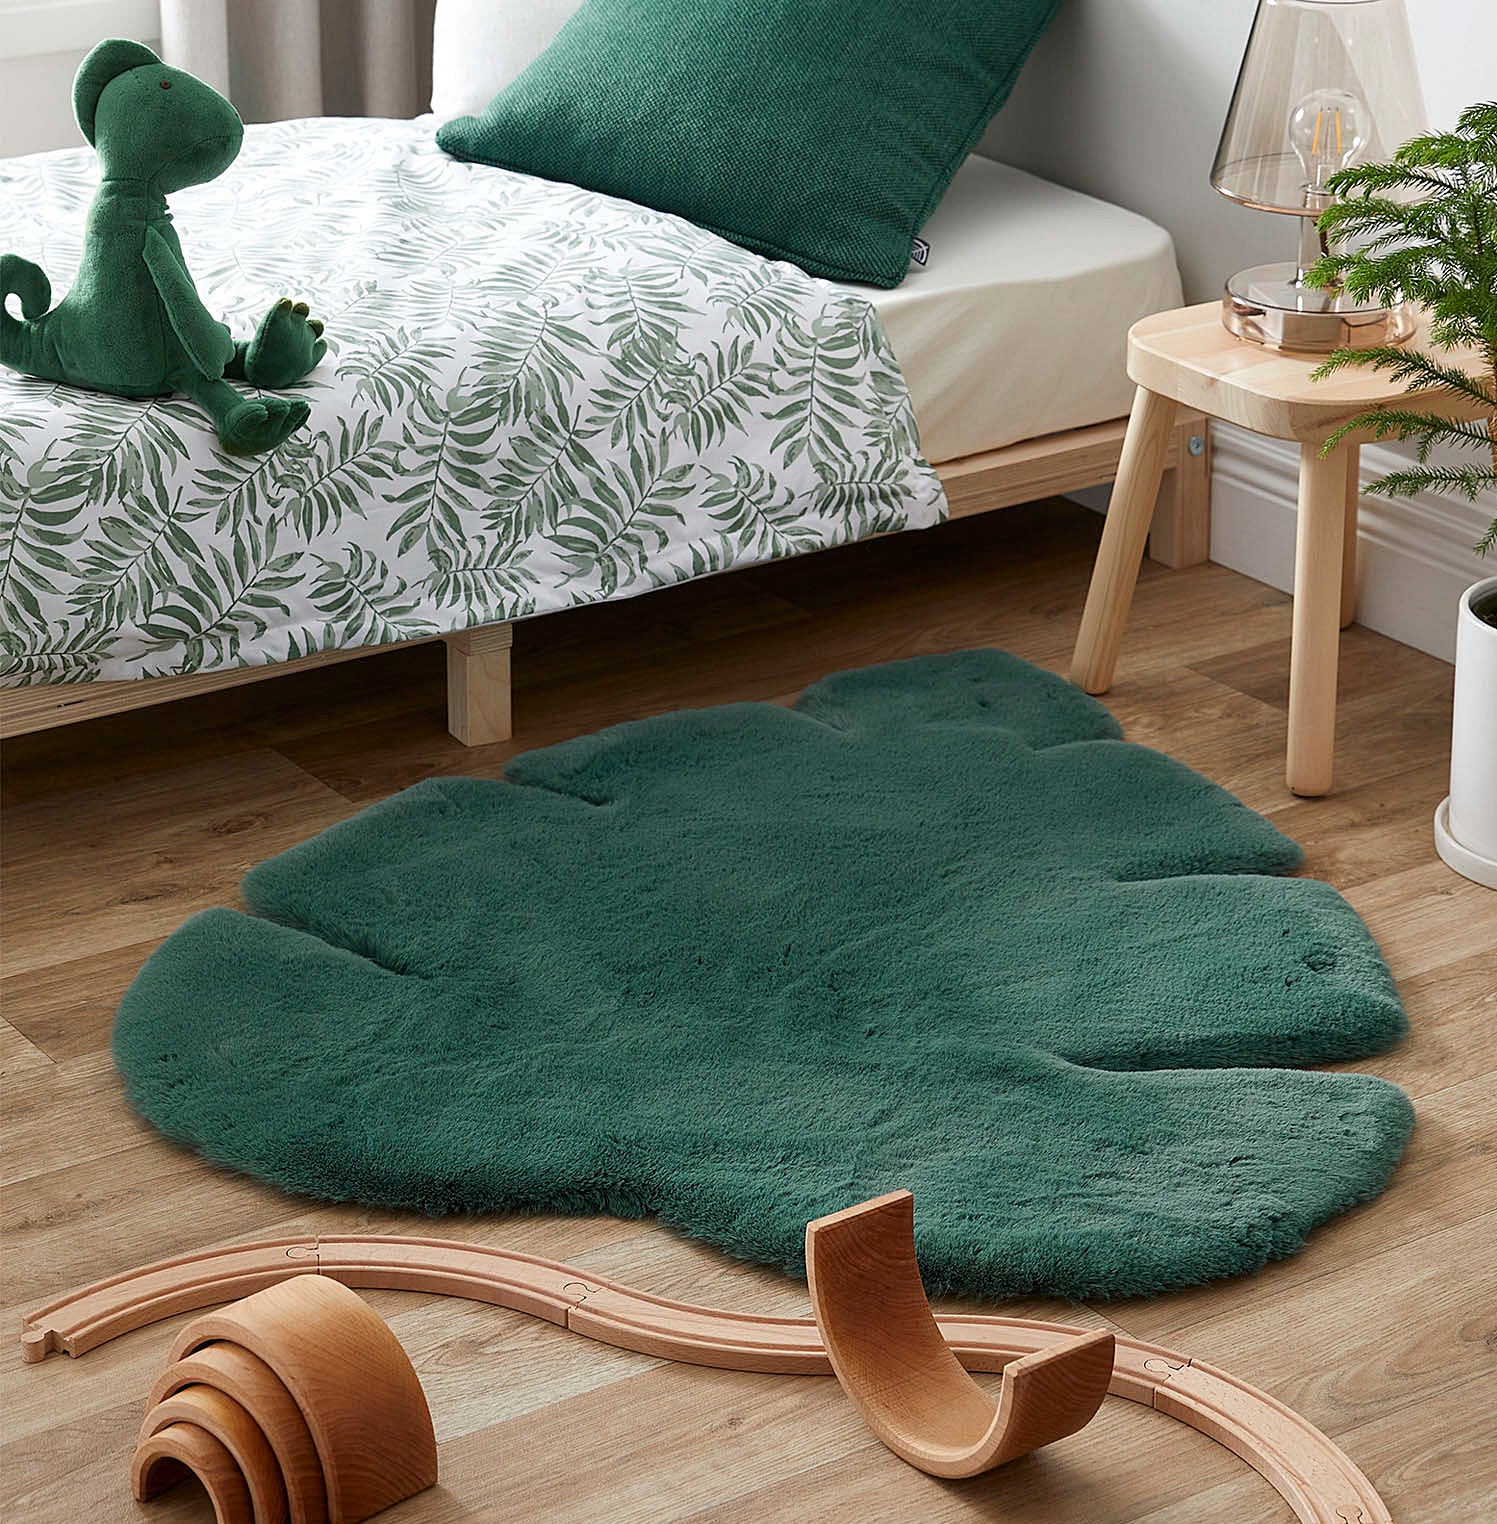 The monstera rug on the floor of a bedroom